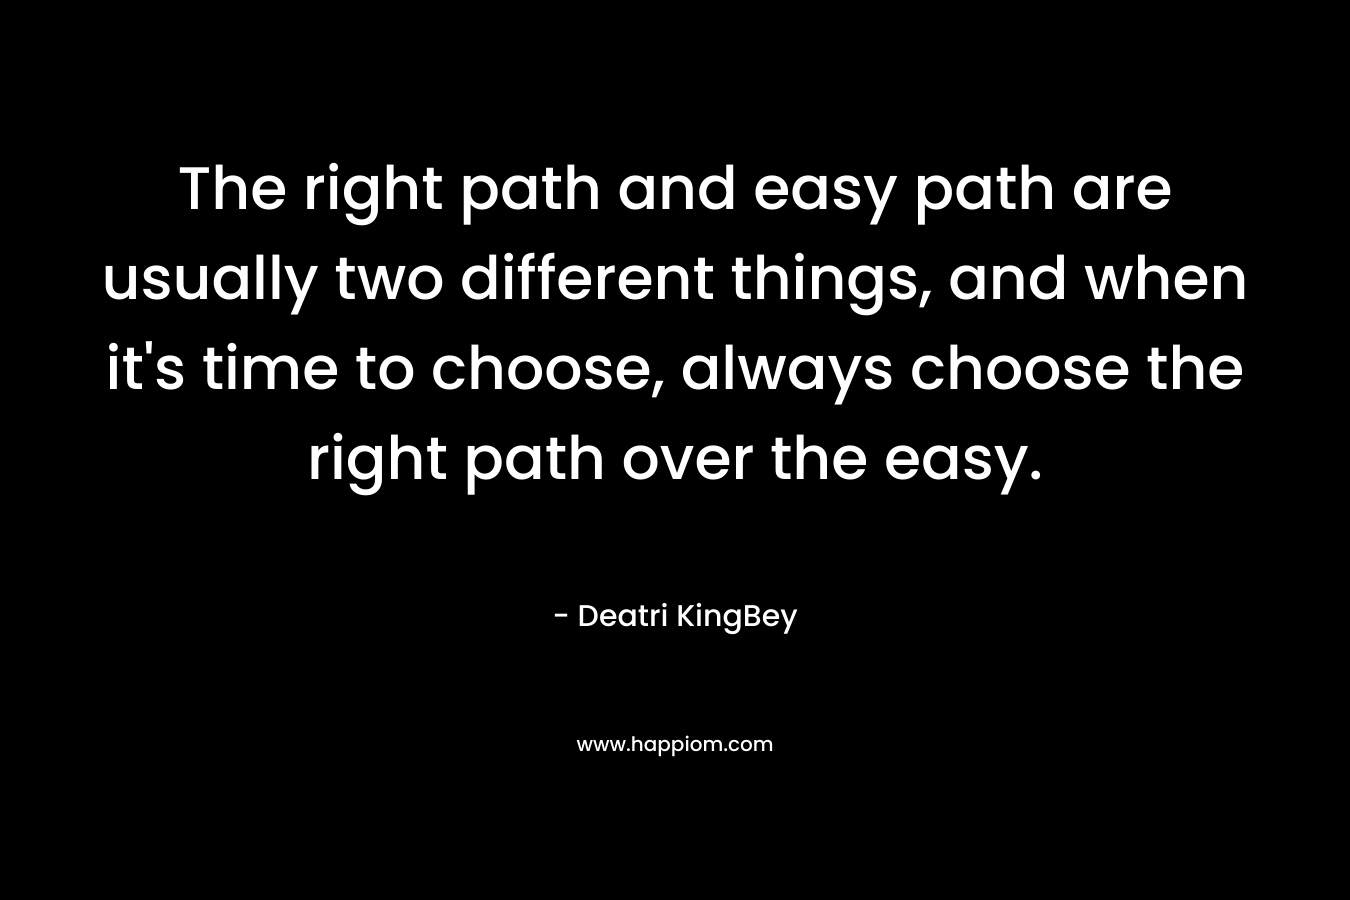 The right path and easy path are usually two different things, and when it's time to choose, always choose the right path over the easy.